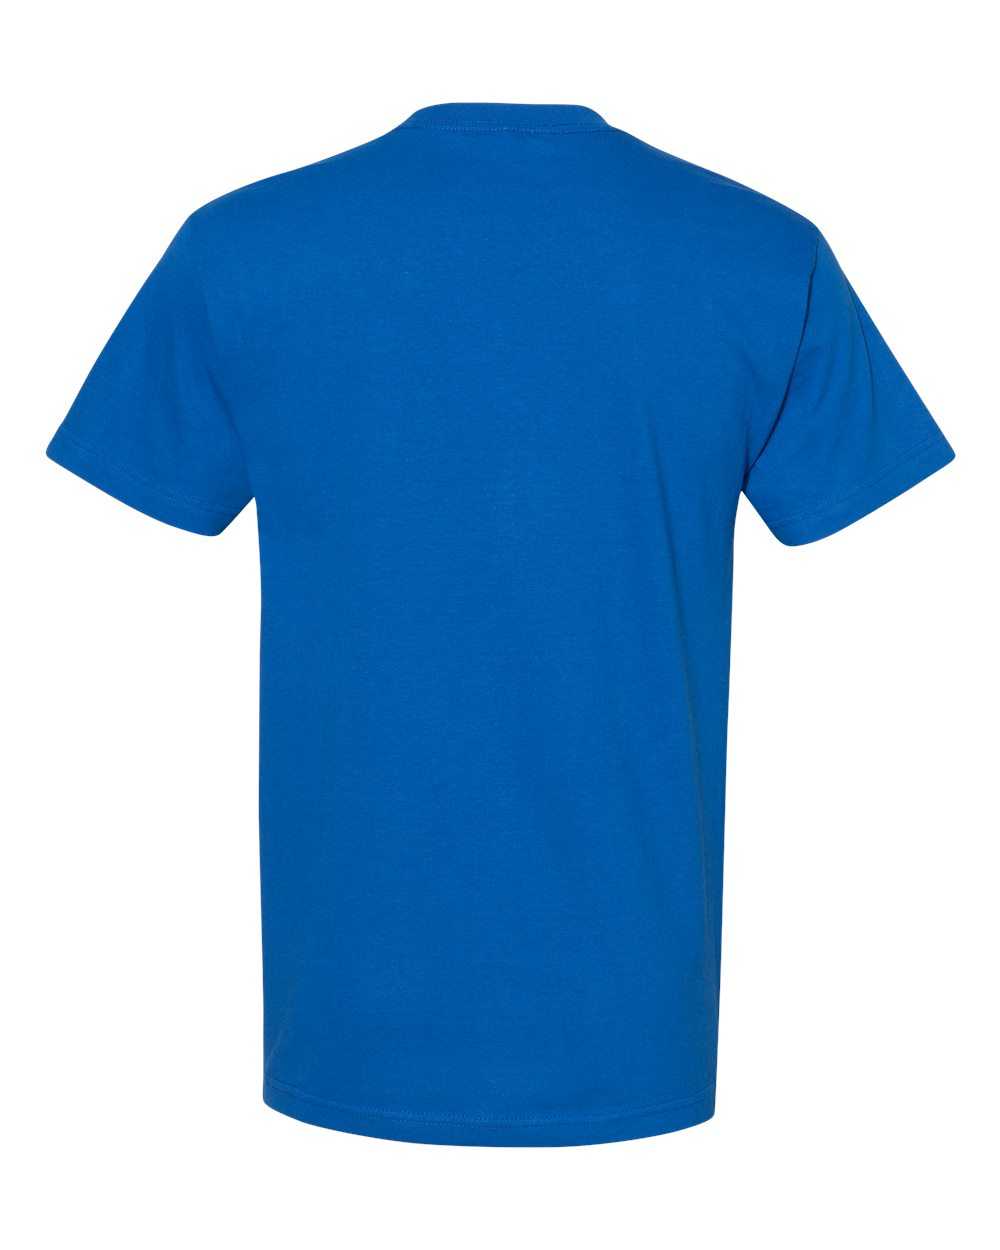 American Apparel 1301 Unisex Heavyweight Cotton T-Shirt - Royal - HIT a Double